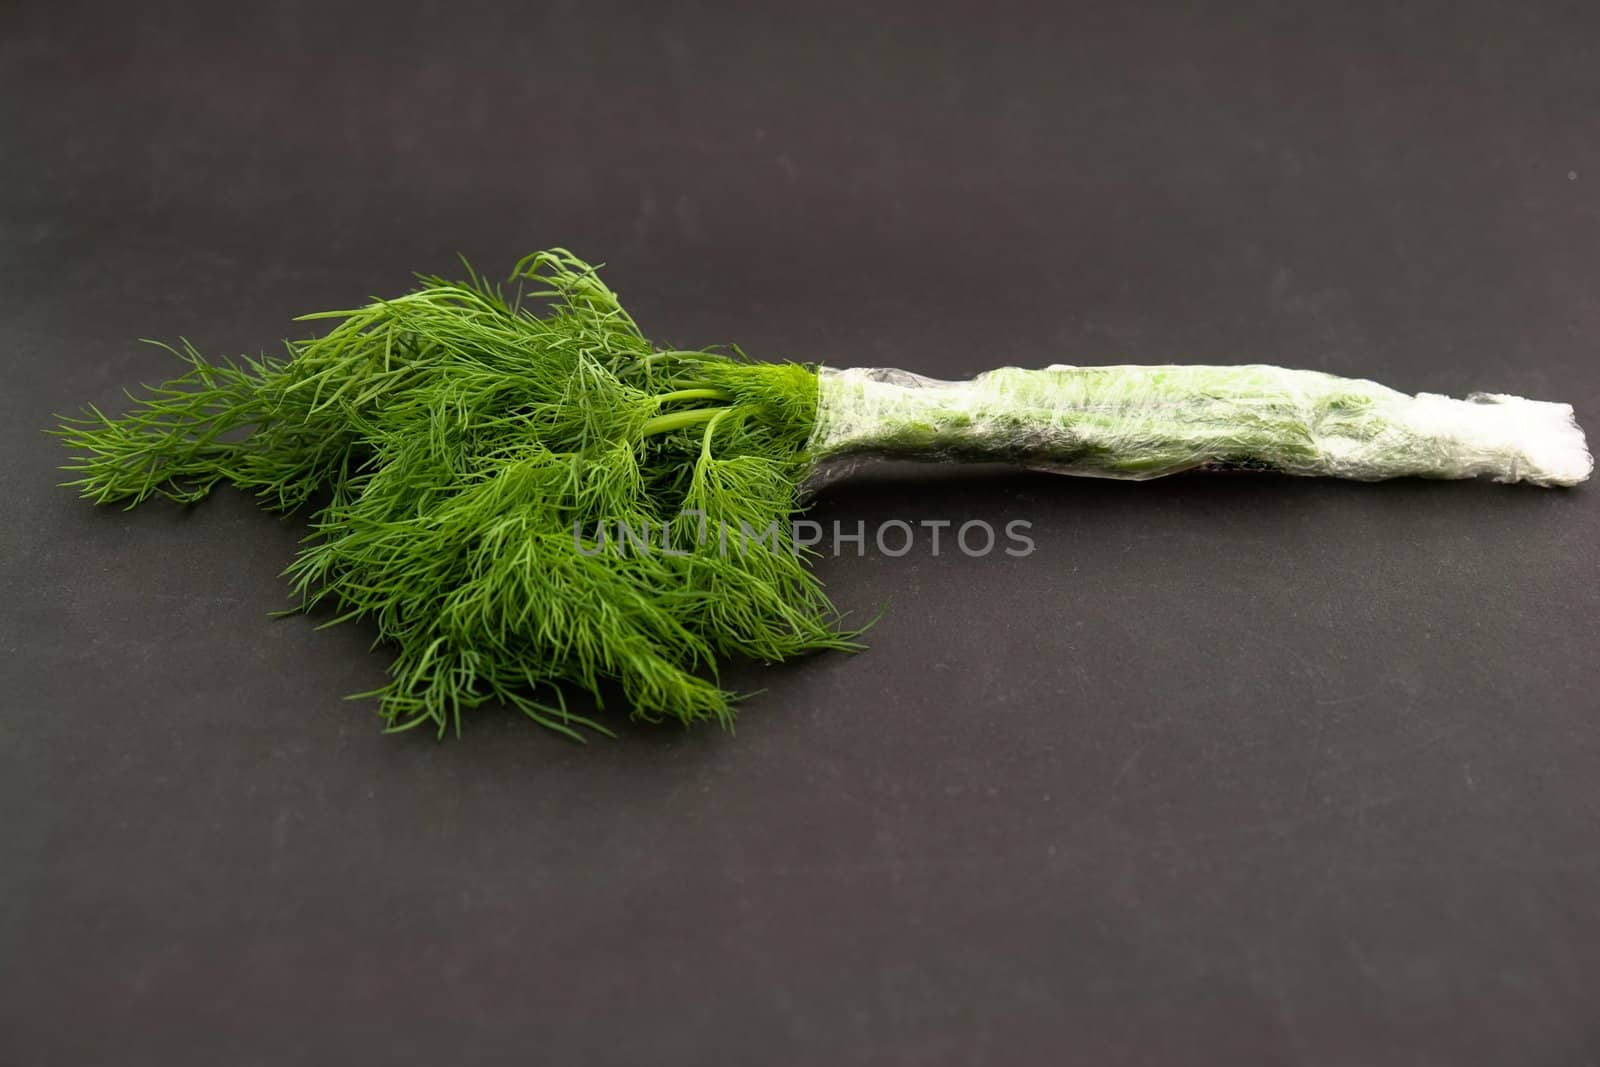 Fresh green dill on a black background